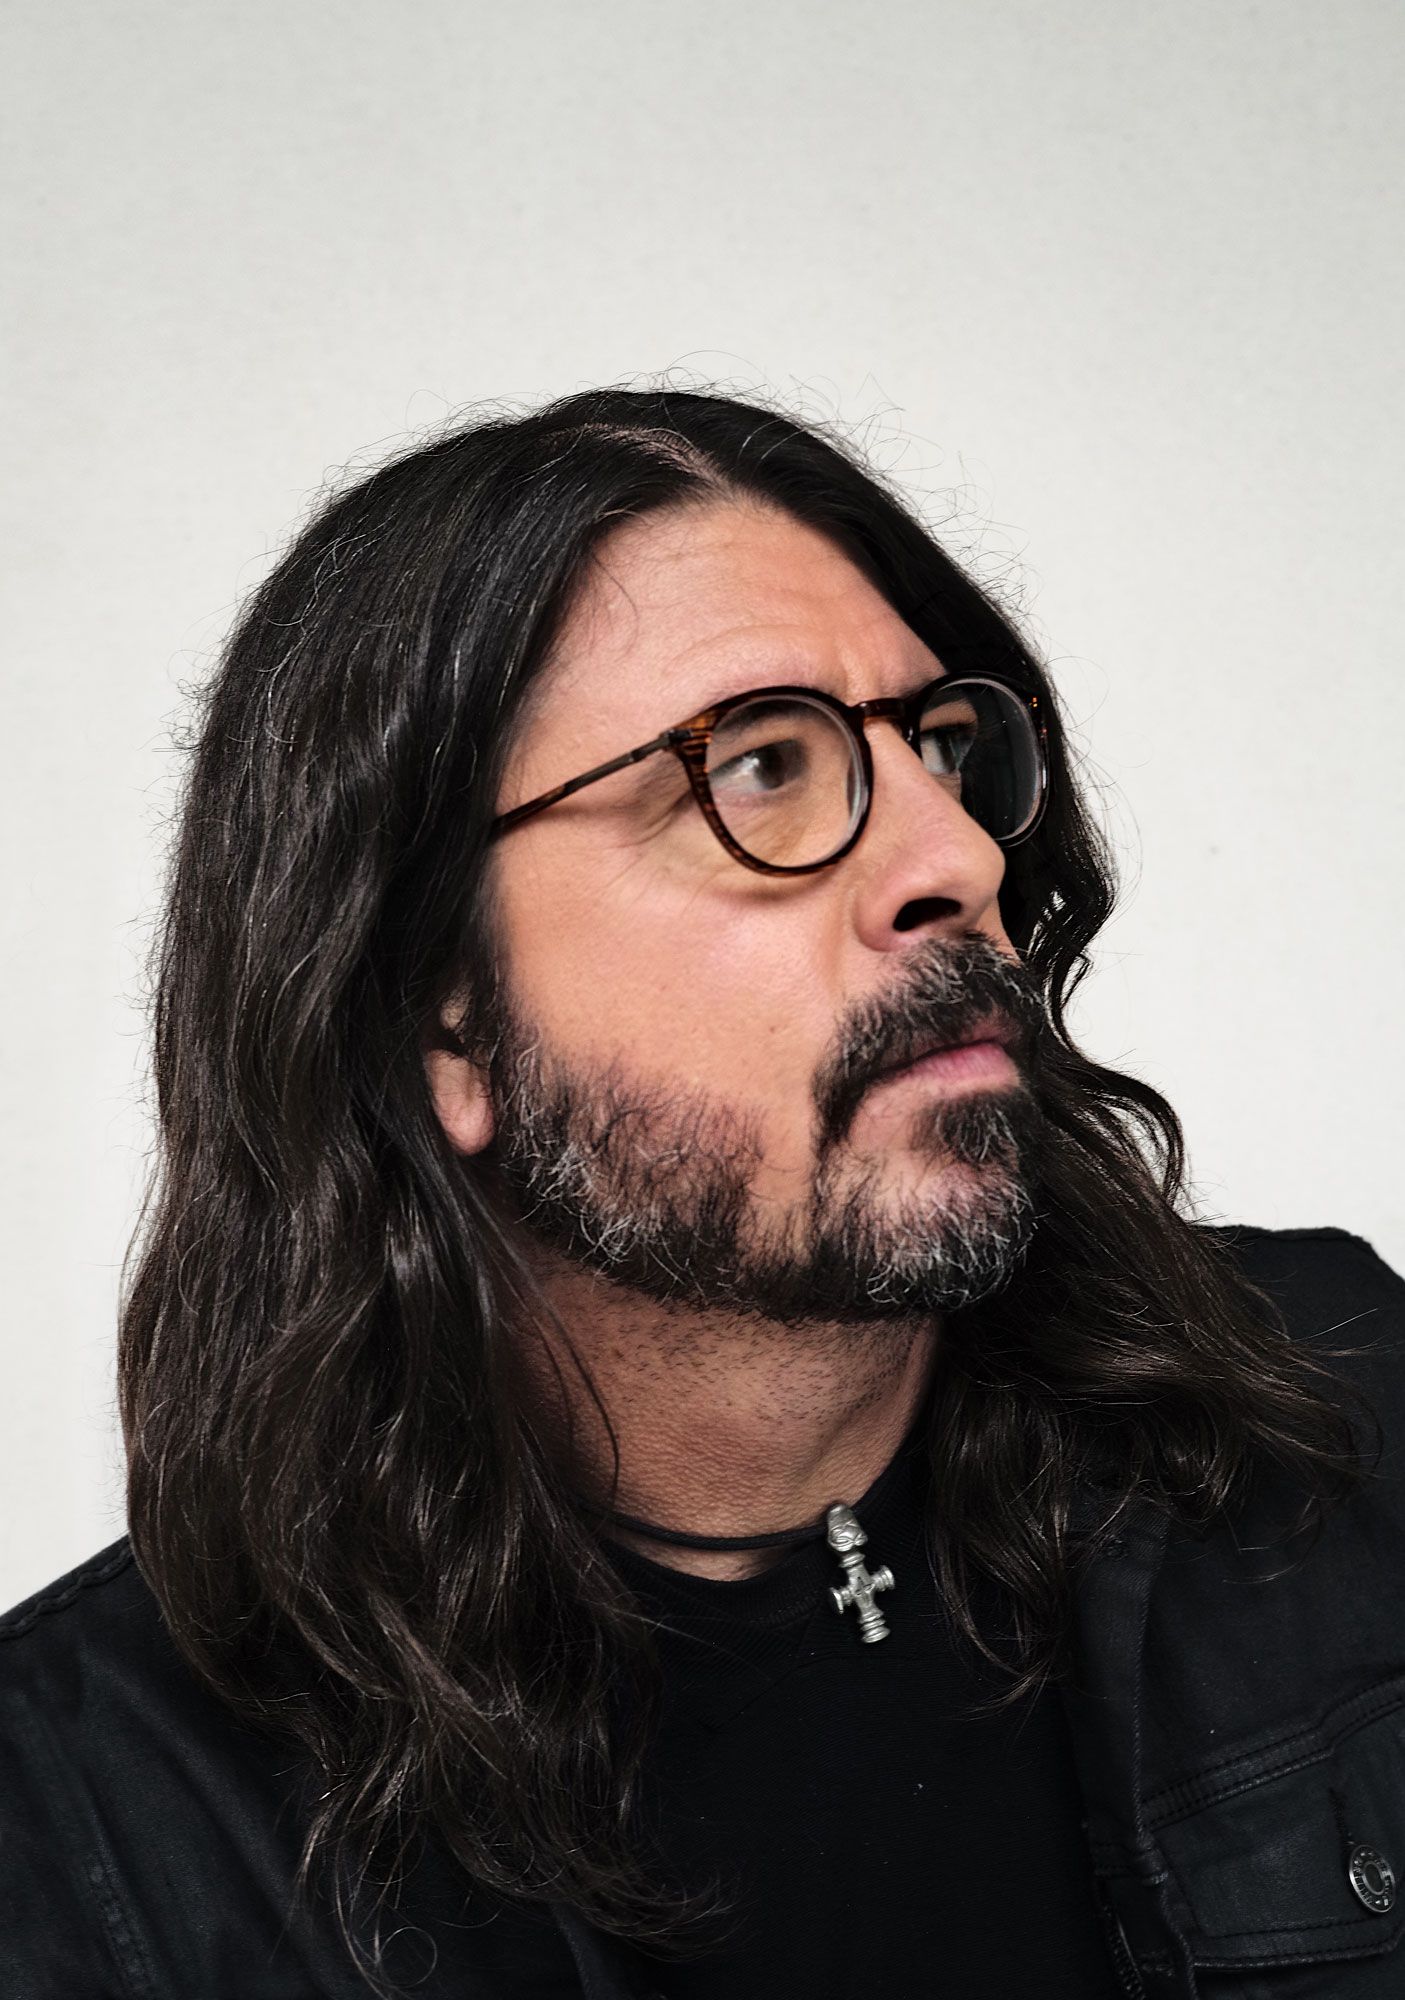 Dave Grohl on Foo Fighters, His Memoir, Life After Nirvana